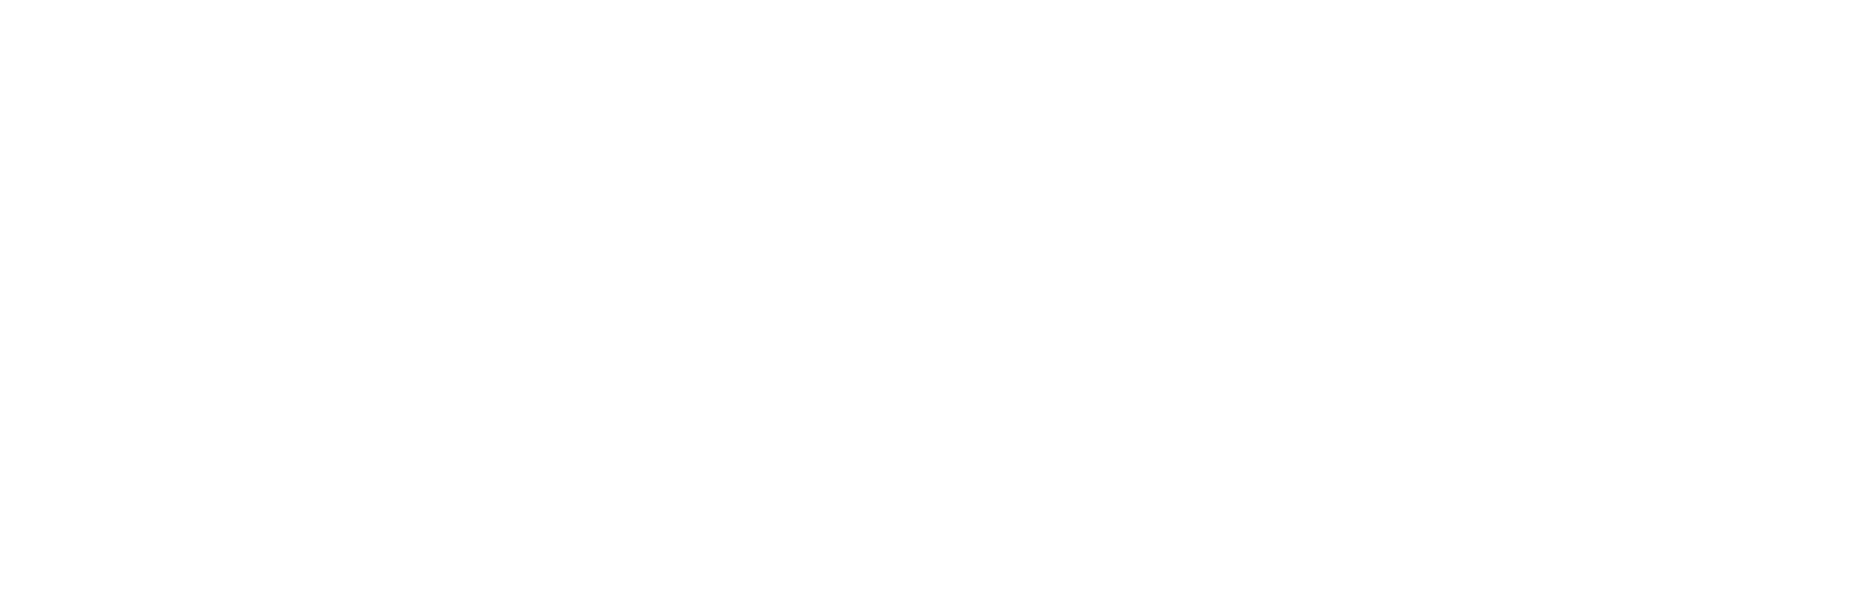 noodlies - A Sydney food blog by Thang Ngo